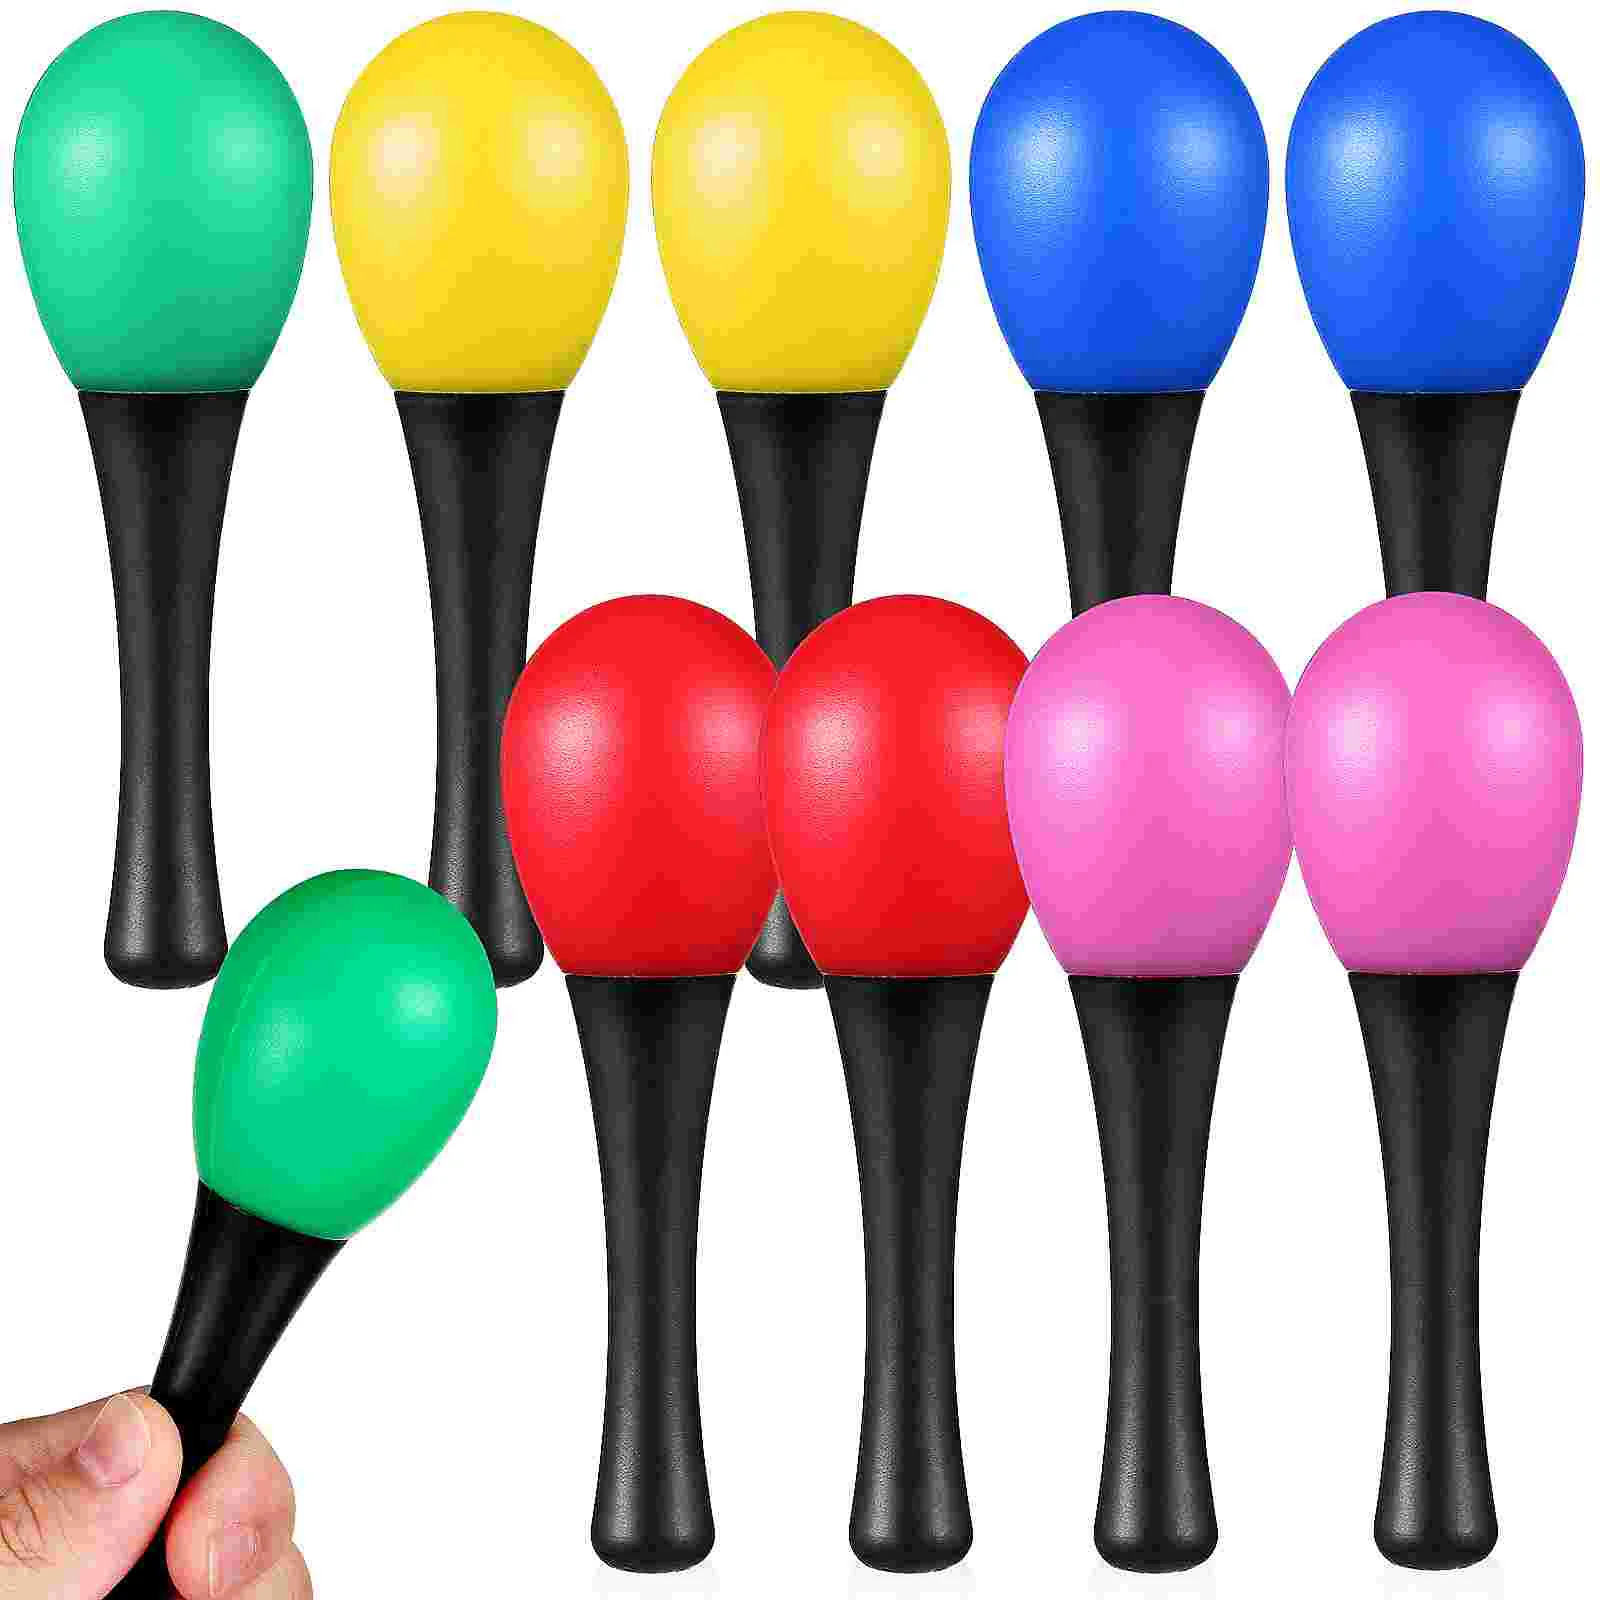 

10 Pcs Small Maraca Toy Maracas Mexican Party Favors Musical Instruments Mini Percussion Plastic Sand Hammer Plaything Training